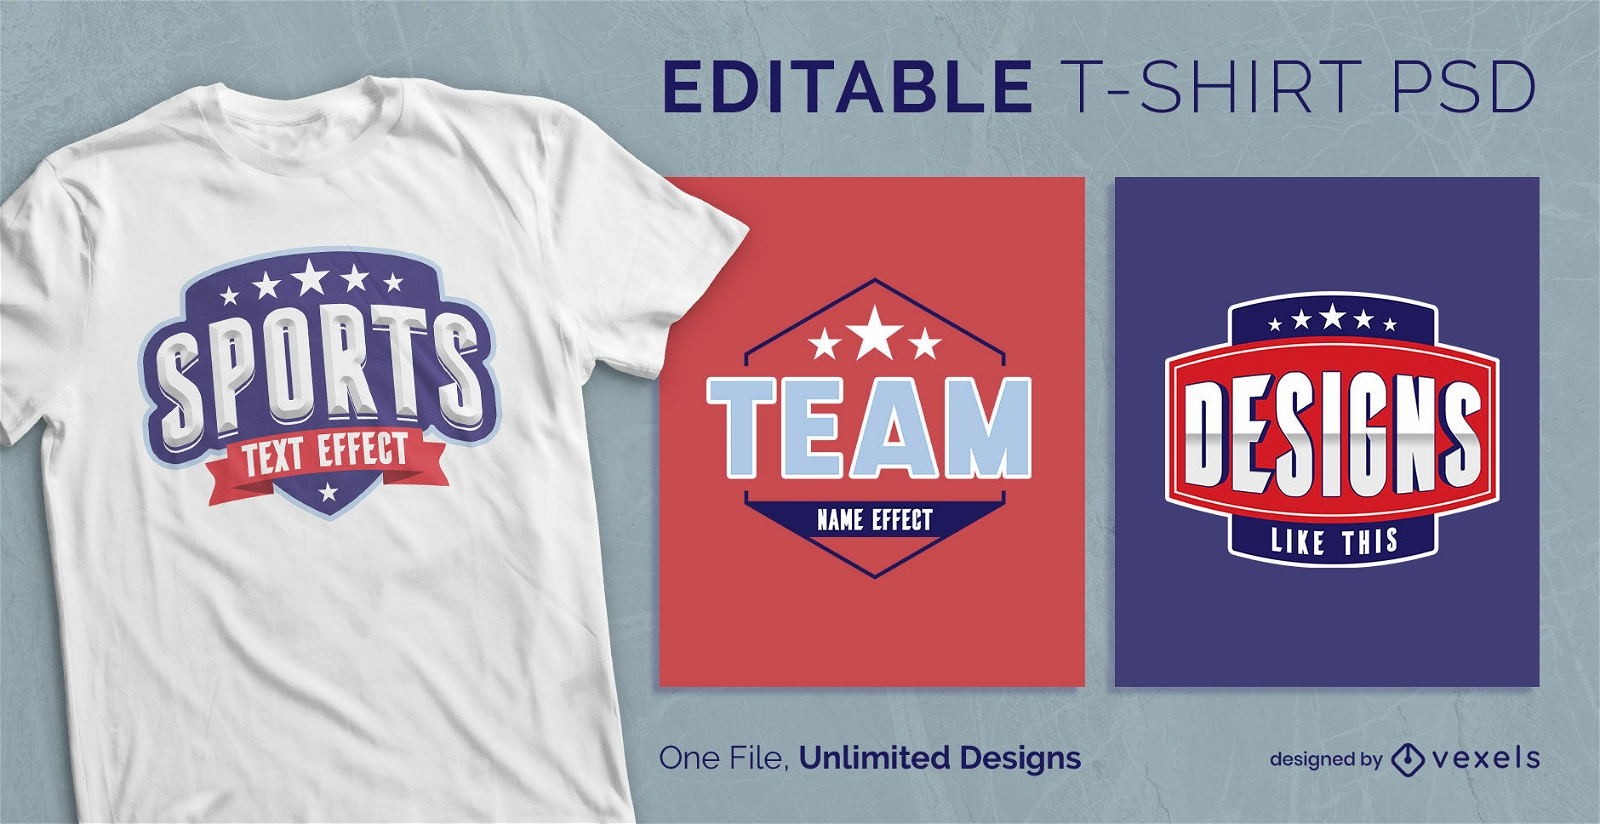 Classic sports badges scalable t-shirt psd